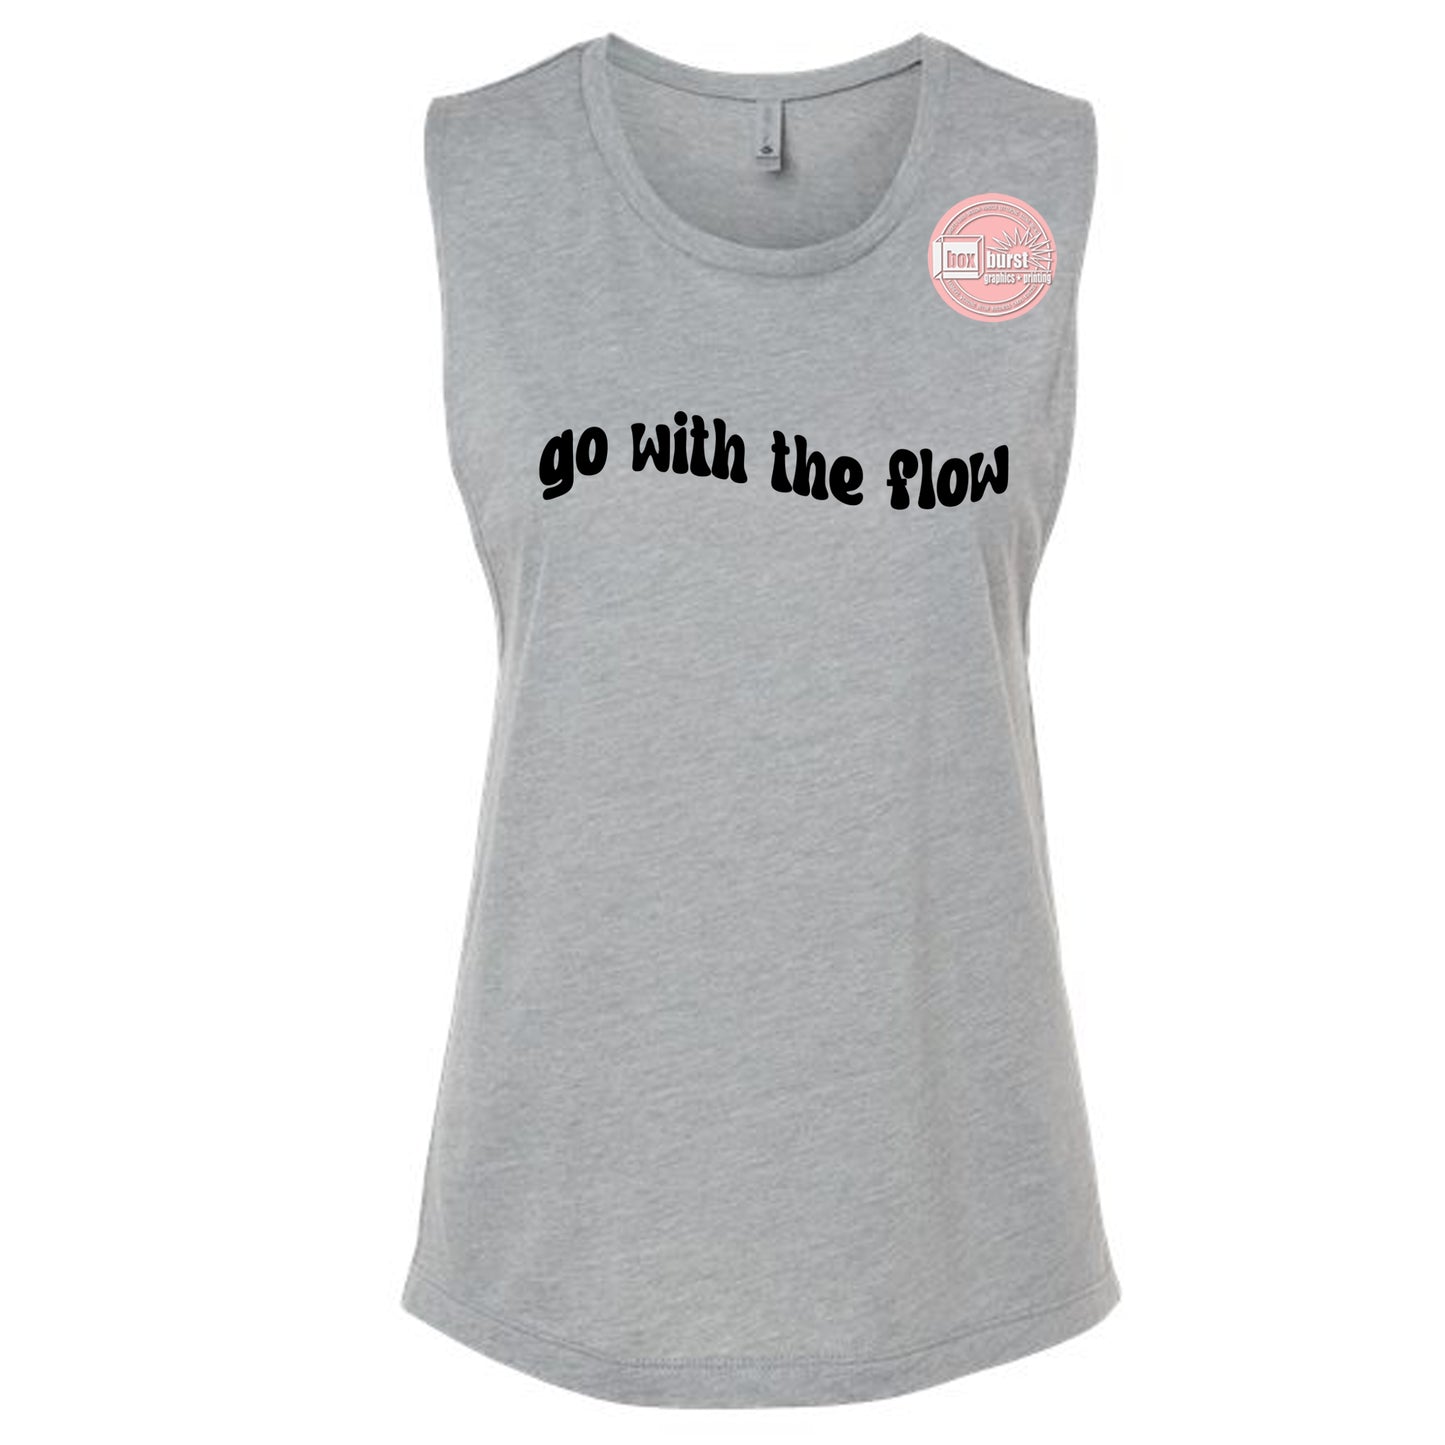 Go with the flow muscle tank top women's muscle tank